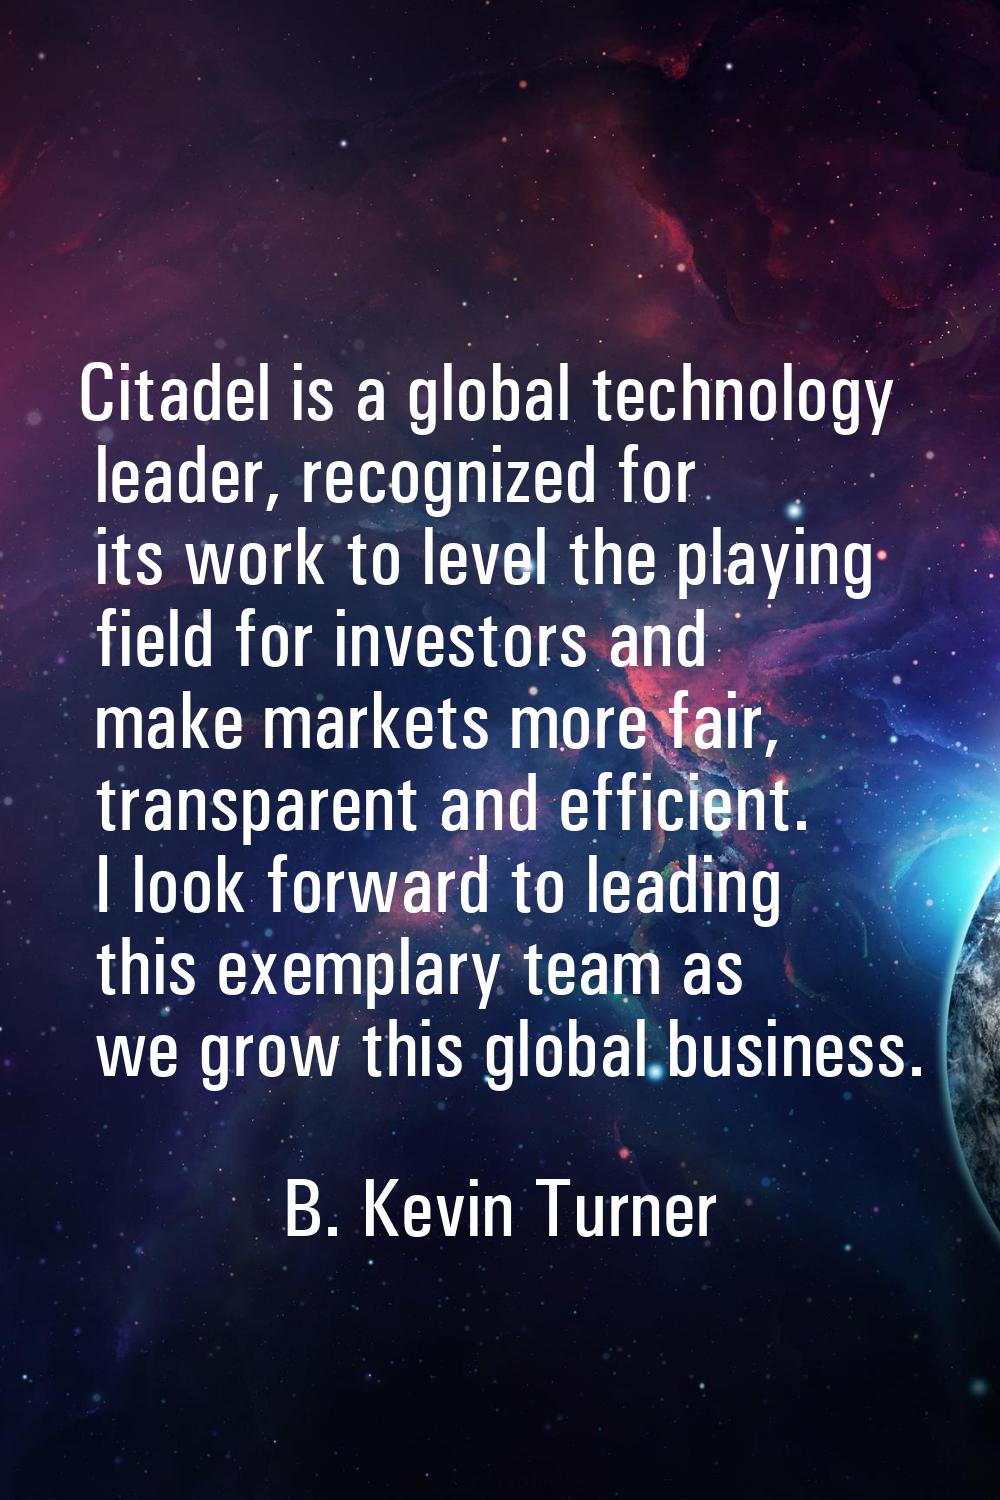 Citadel is a global technology leader, recognized for its work to level the playing field for inves